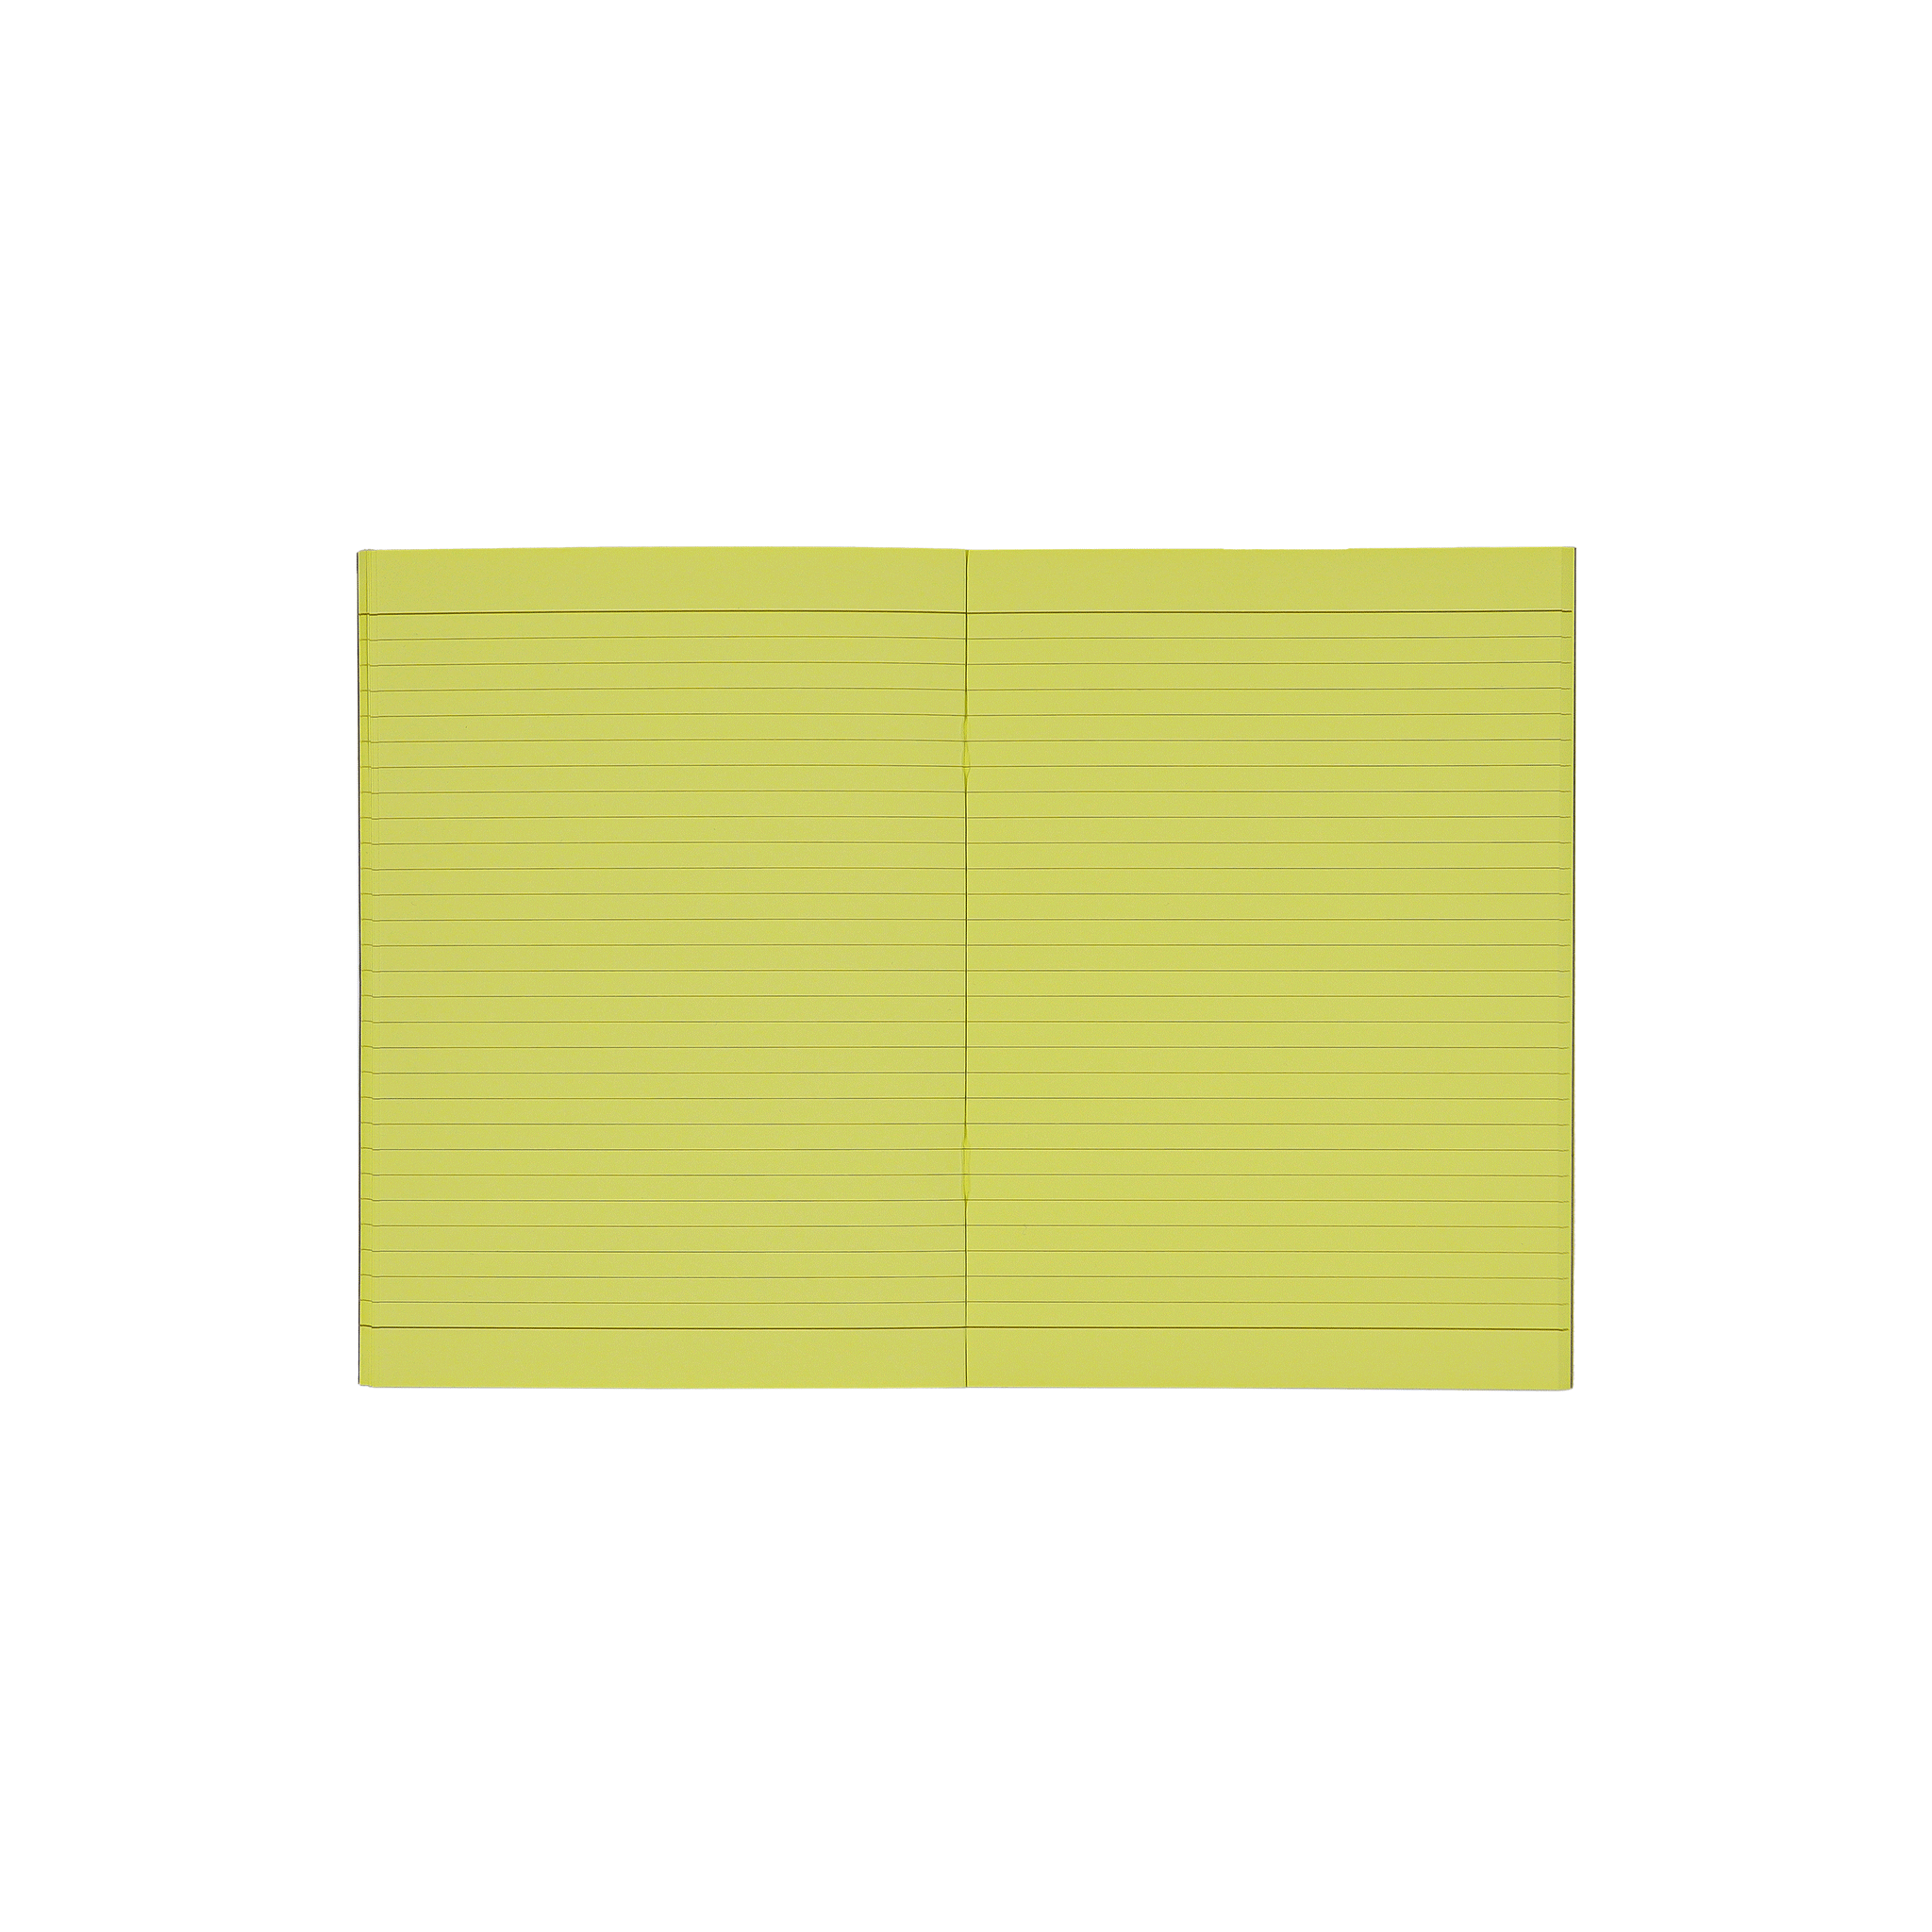 Socolo notebook, open showing its yellow paper pages, lined with yellow ink. 